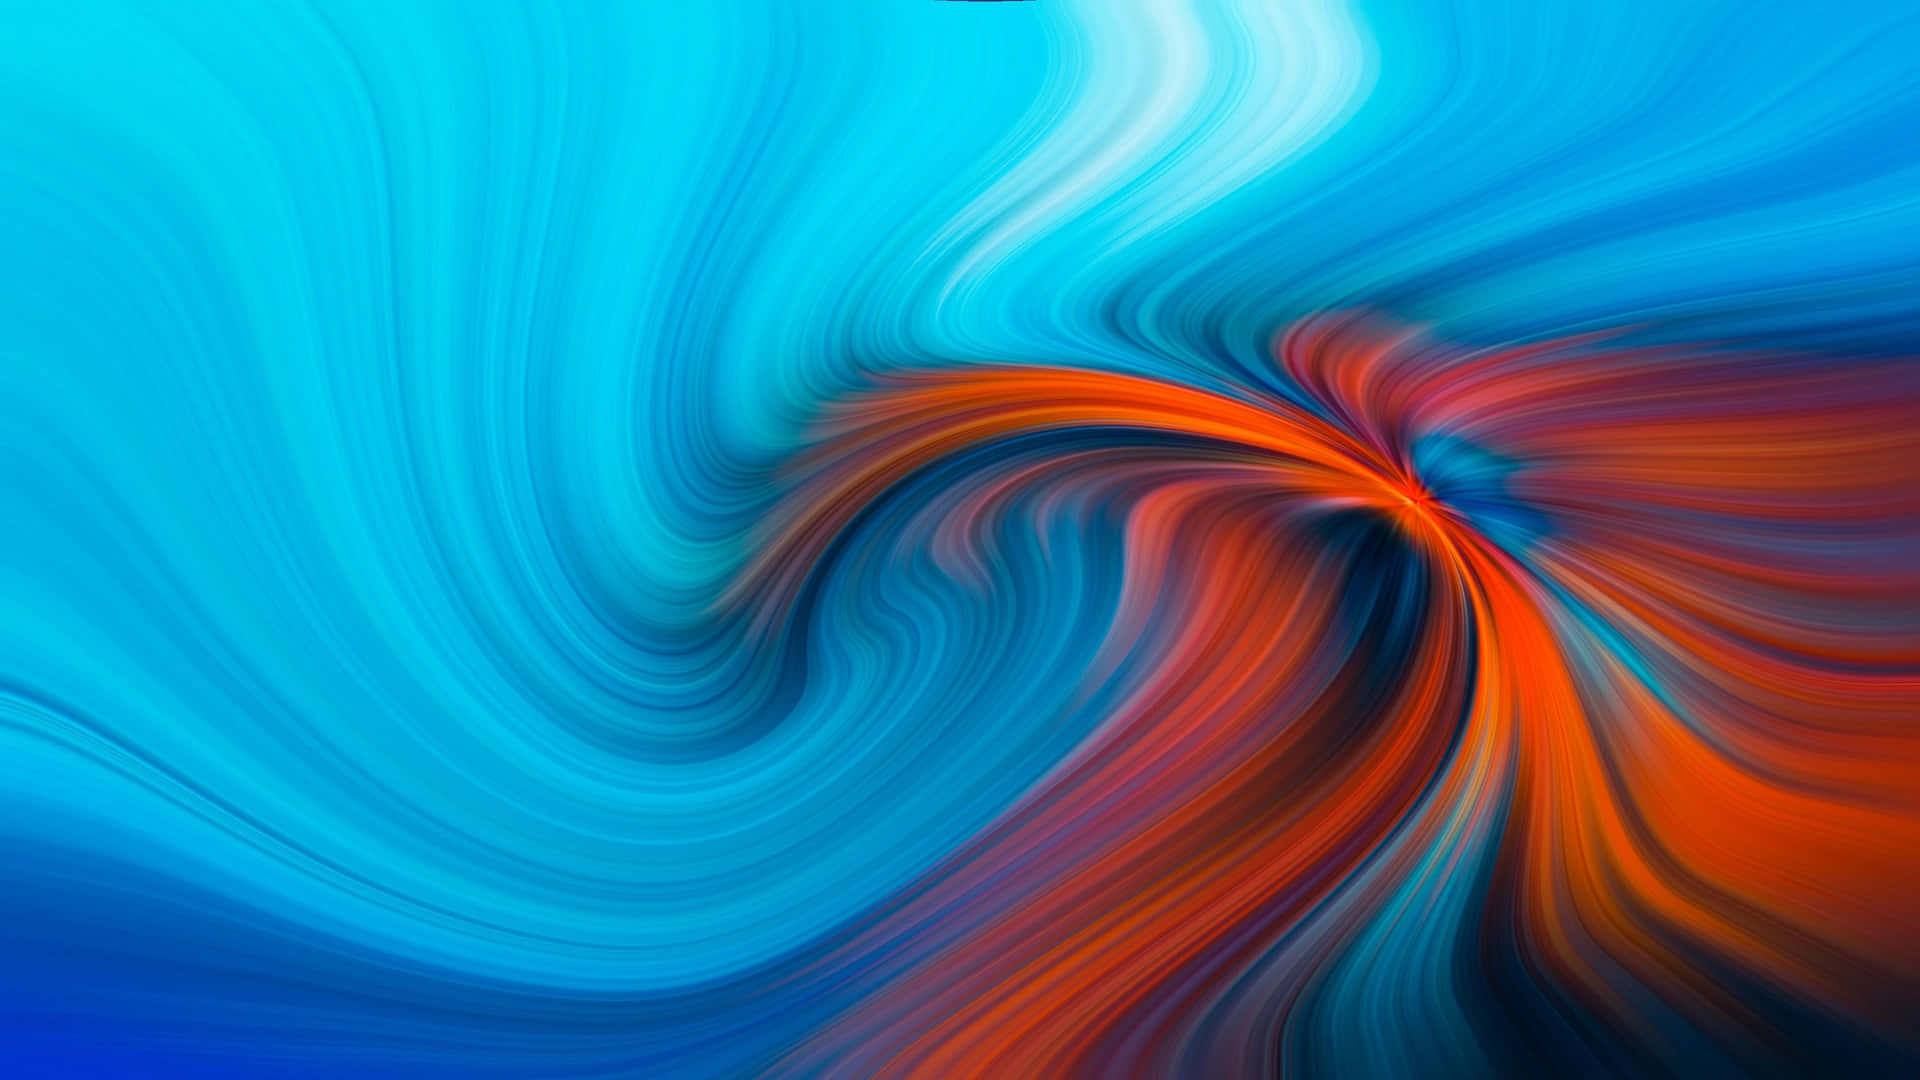 An Abstract Blue And Orange Swirling Pattern